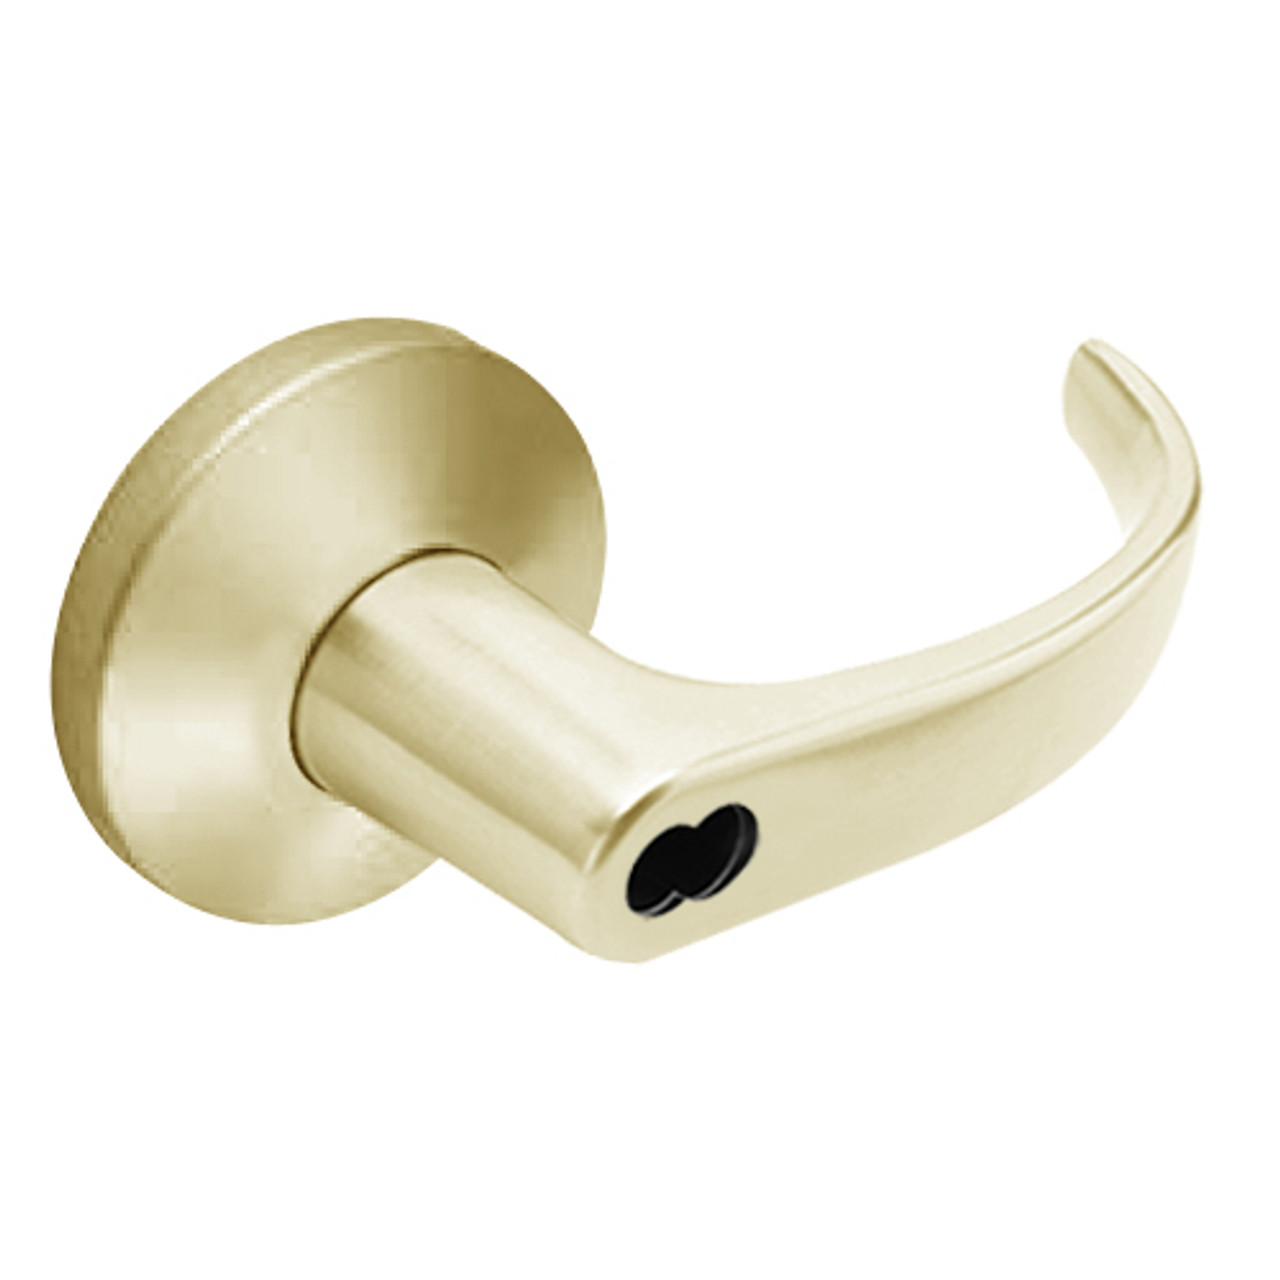 9K37XR14KSTK606 Best 9K Series Special Function Cylindrical Lever Locks with Curved with Return Lever Design Accept 7 Pin Best Core in Satin Brass